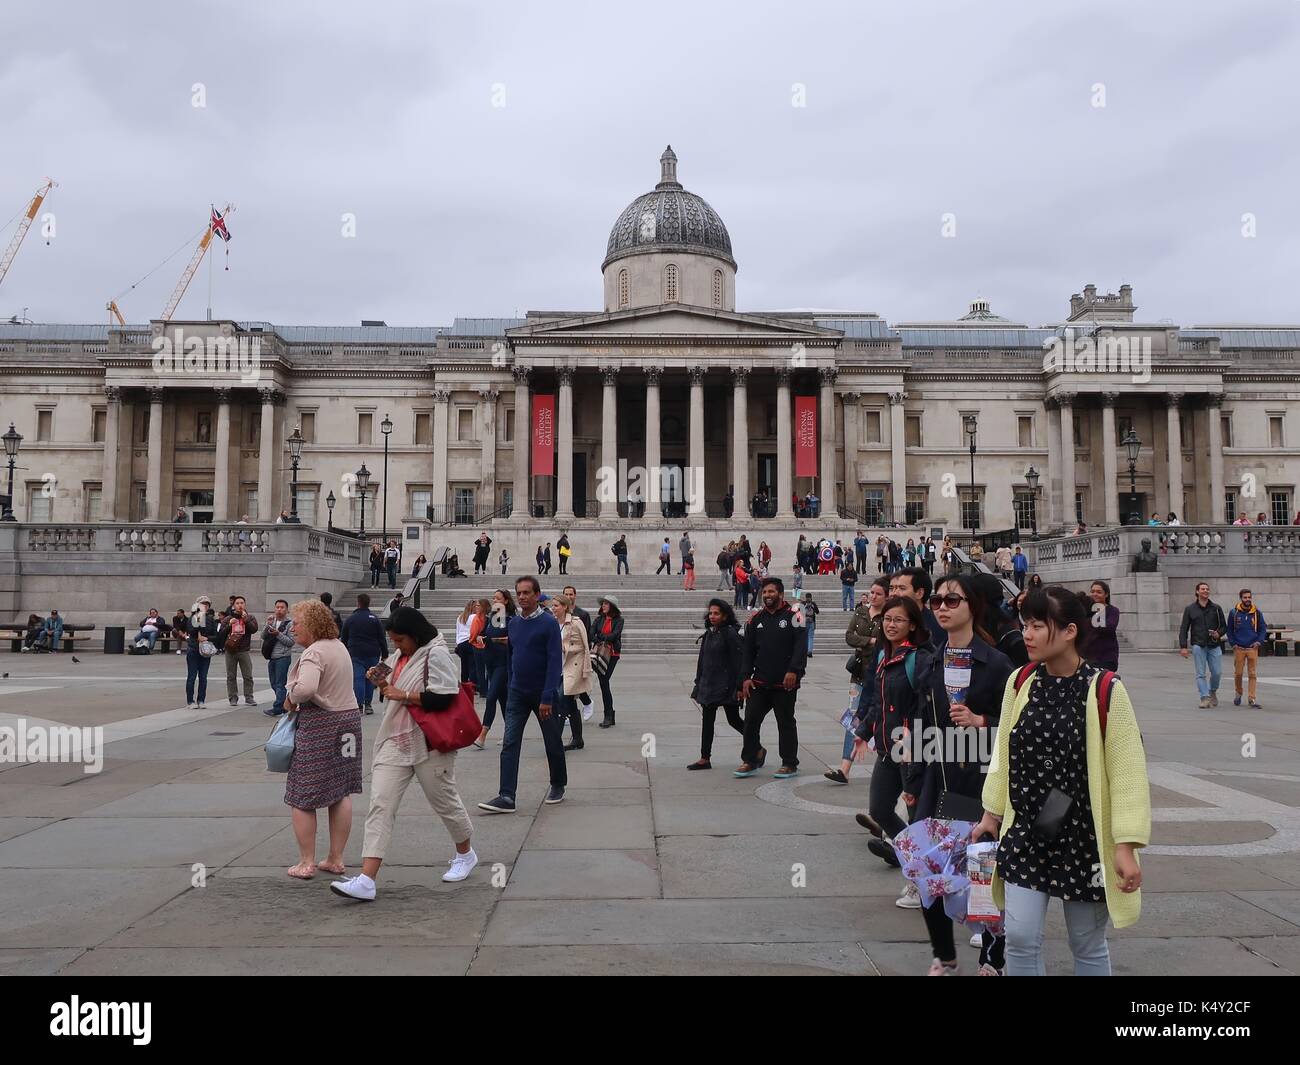 People walk in front of the National Gallery, Trafalgar Square, London, UK. Stock Photo